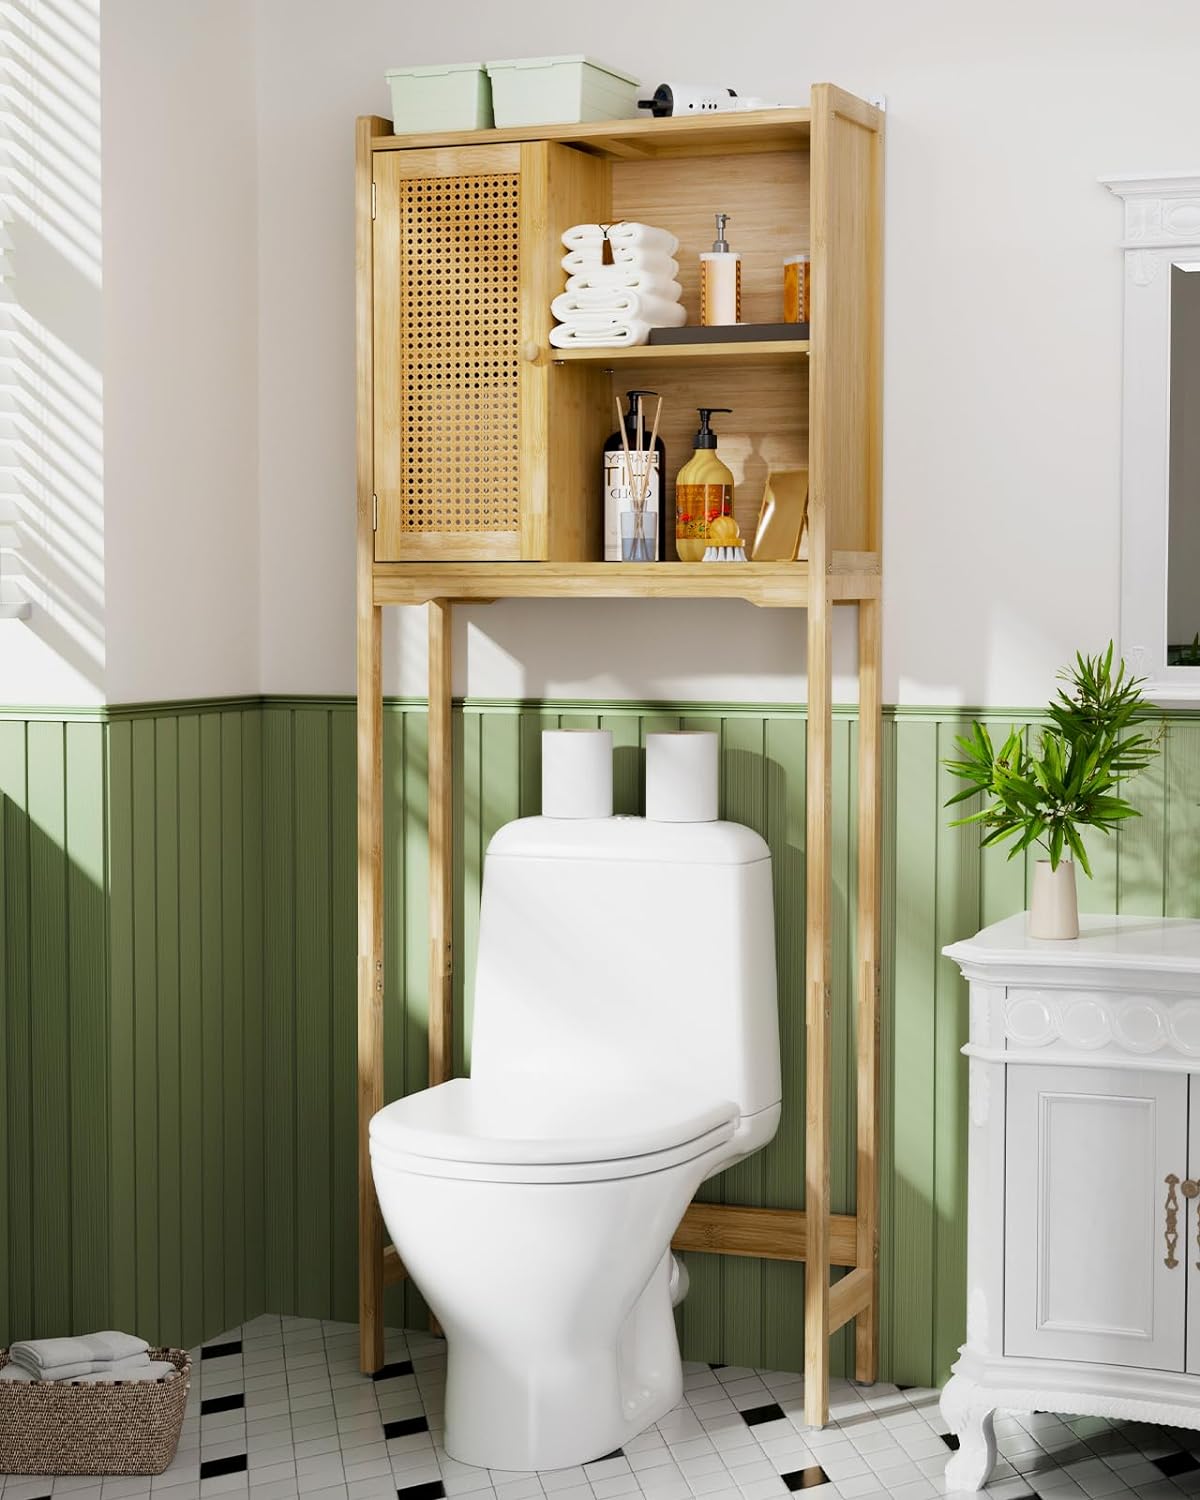 AmazerBath Bamboo Over The Toilet Storage Cabinet with Rattan Door, Natural Color